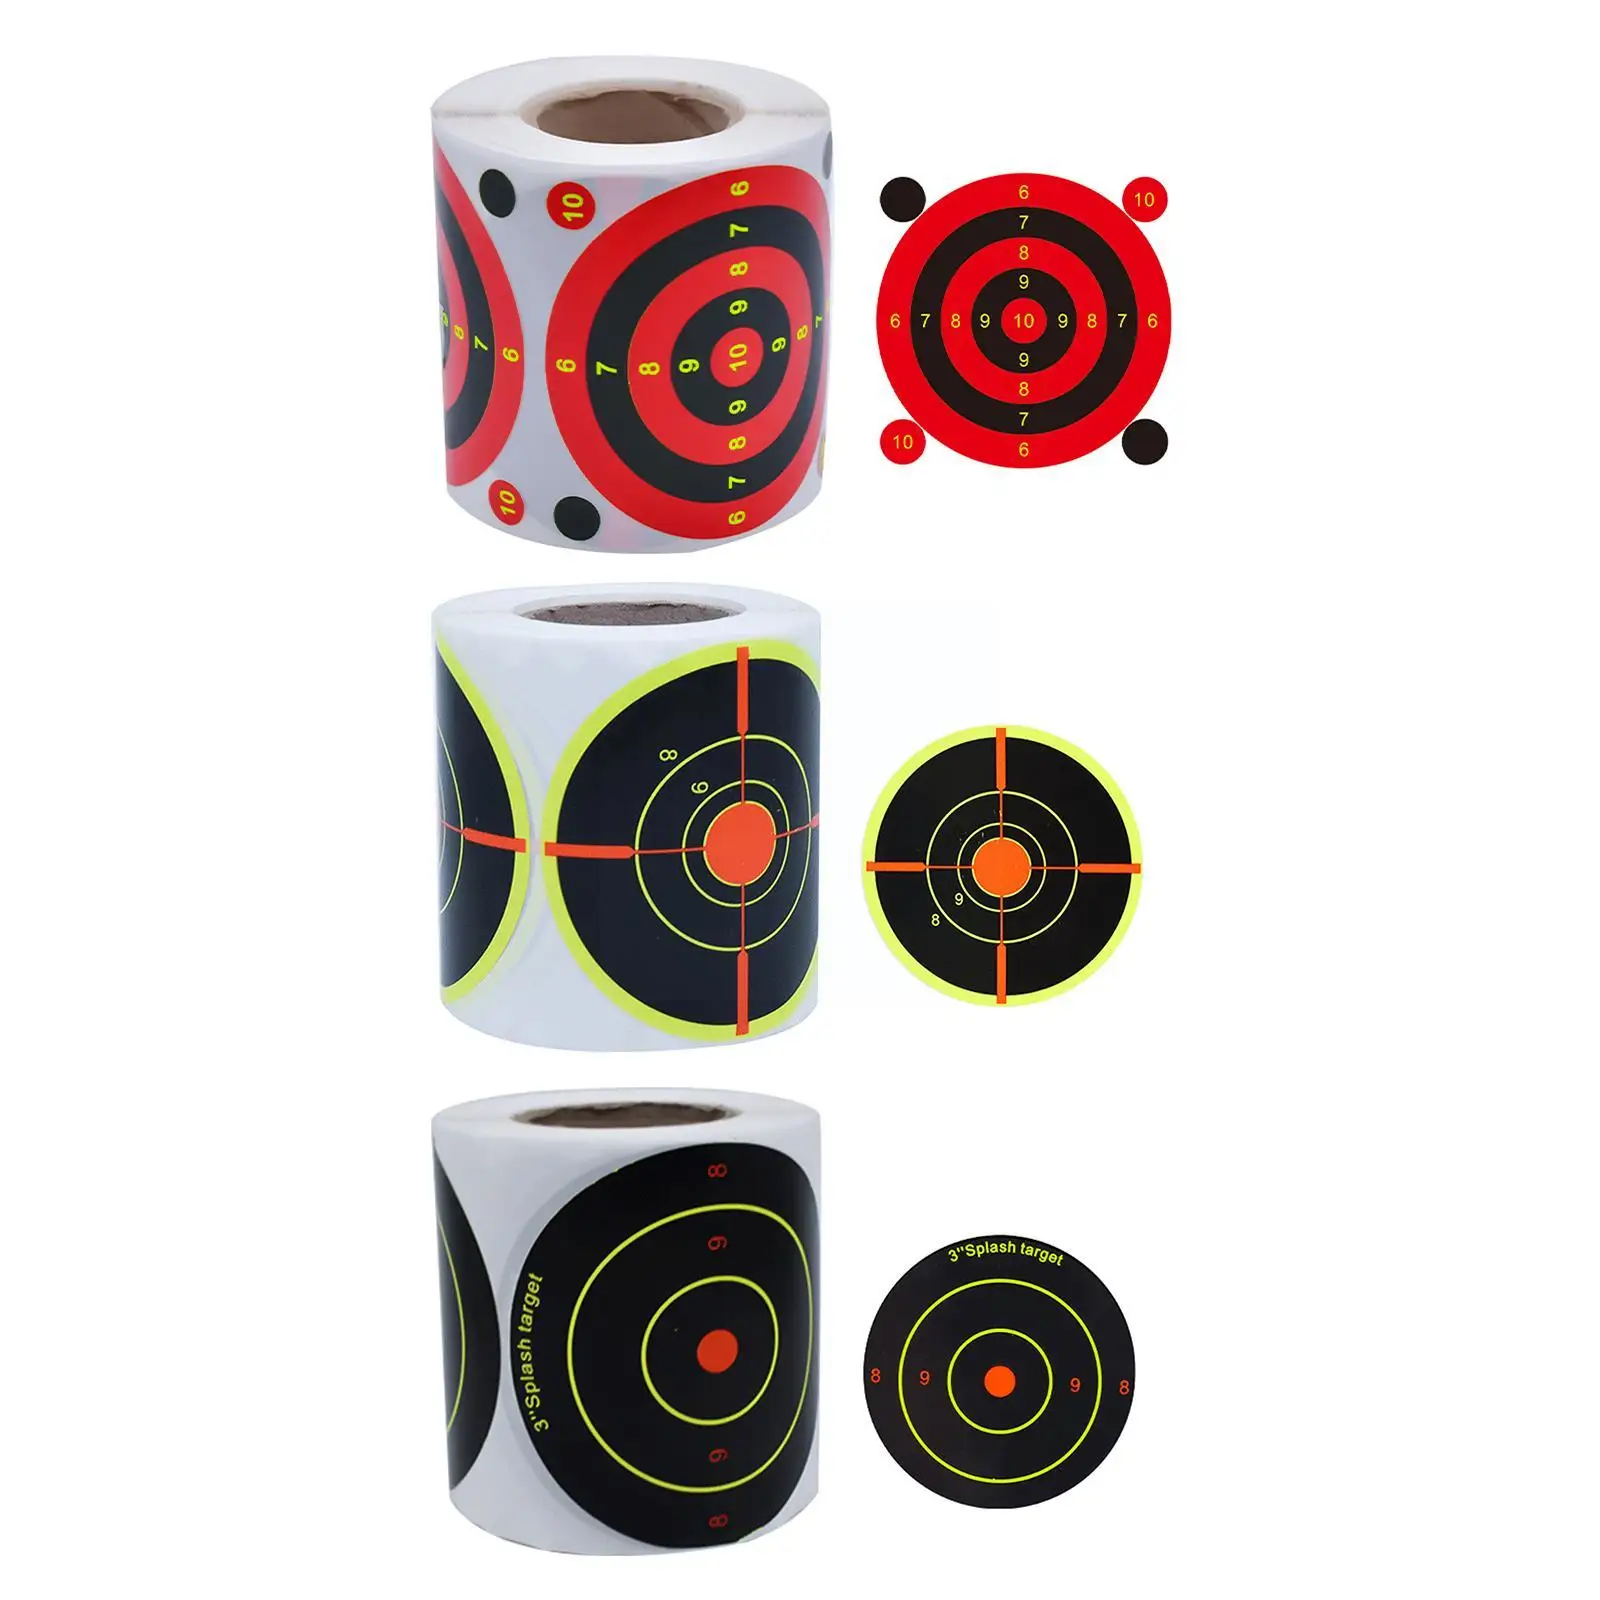 Hot 200pcs Shooting Splatter Target Self-adhesive Shoot Flower Objective Targets Stickers for Archery Bow Hunting Shooting V4B6